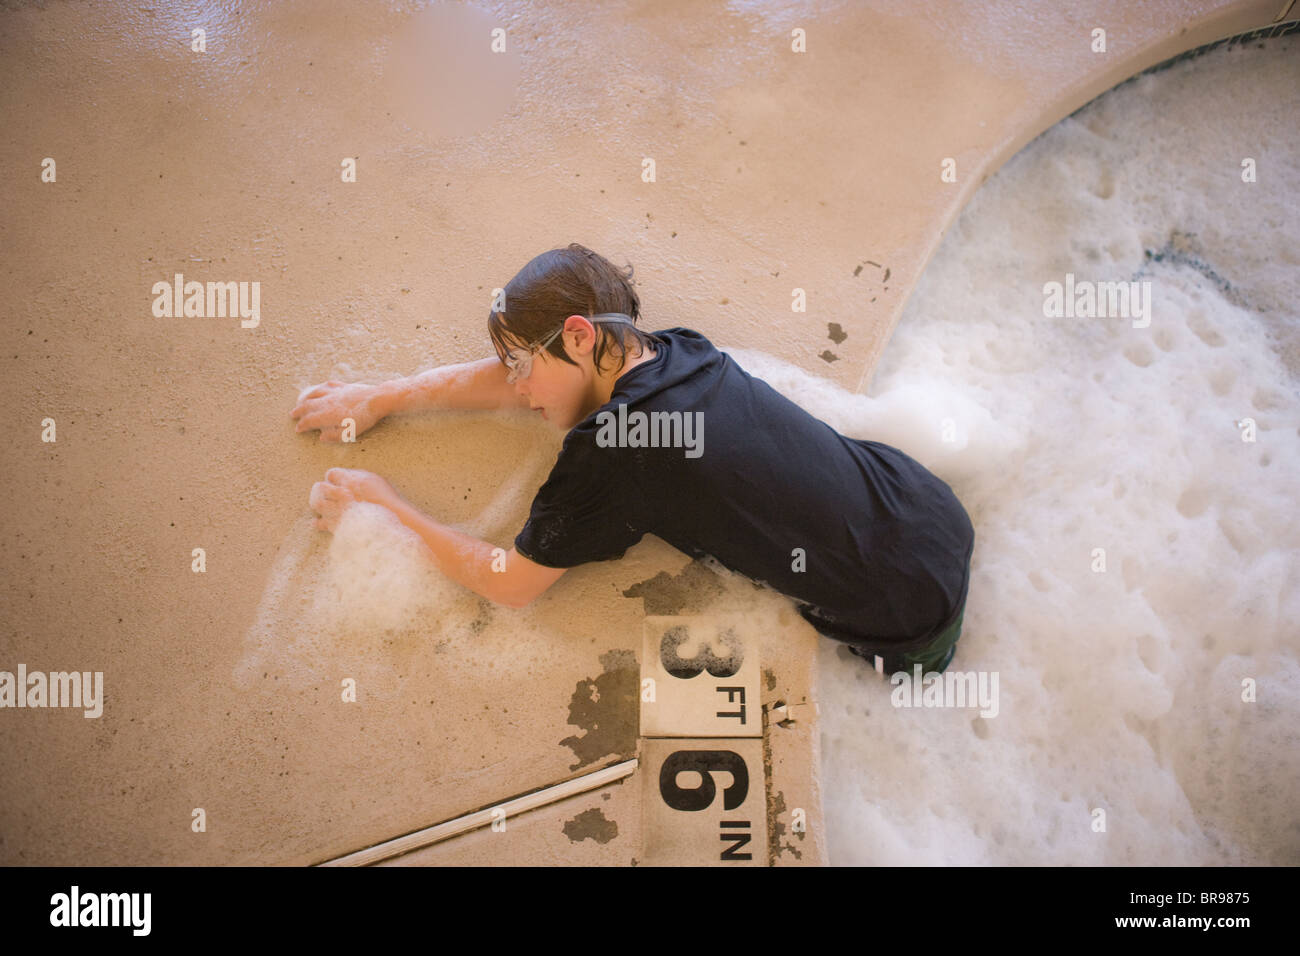 eight year old boy climbing out of a jacuzzi, hot tub, exhausted Stock Photo